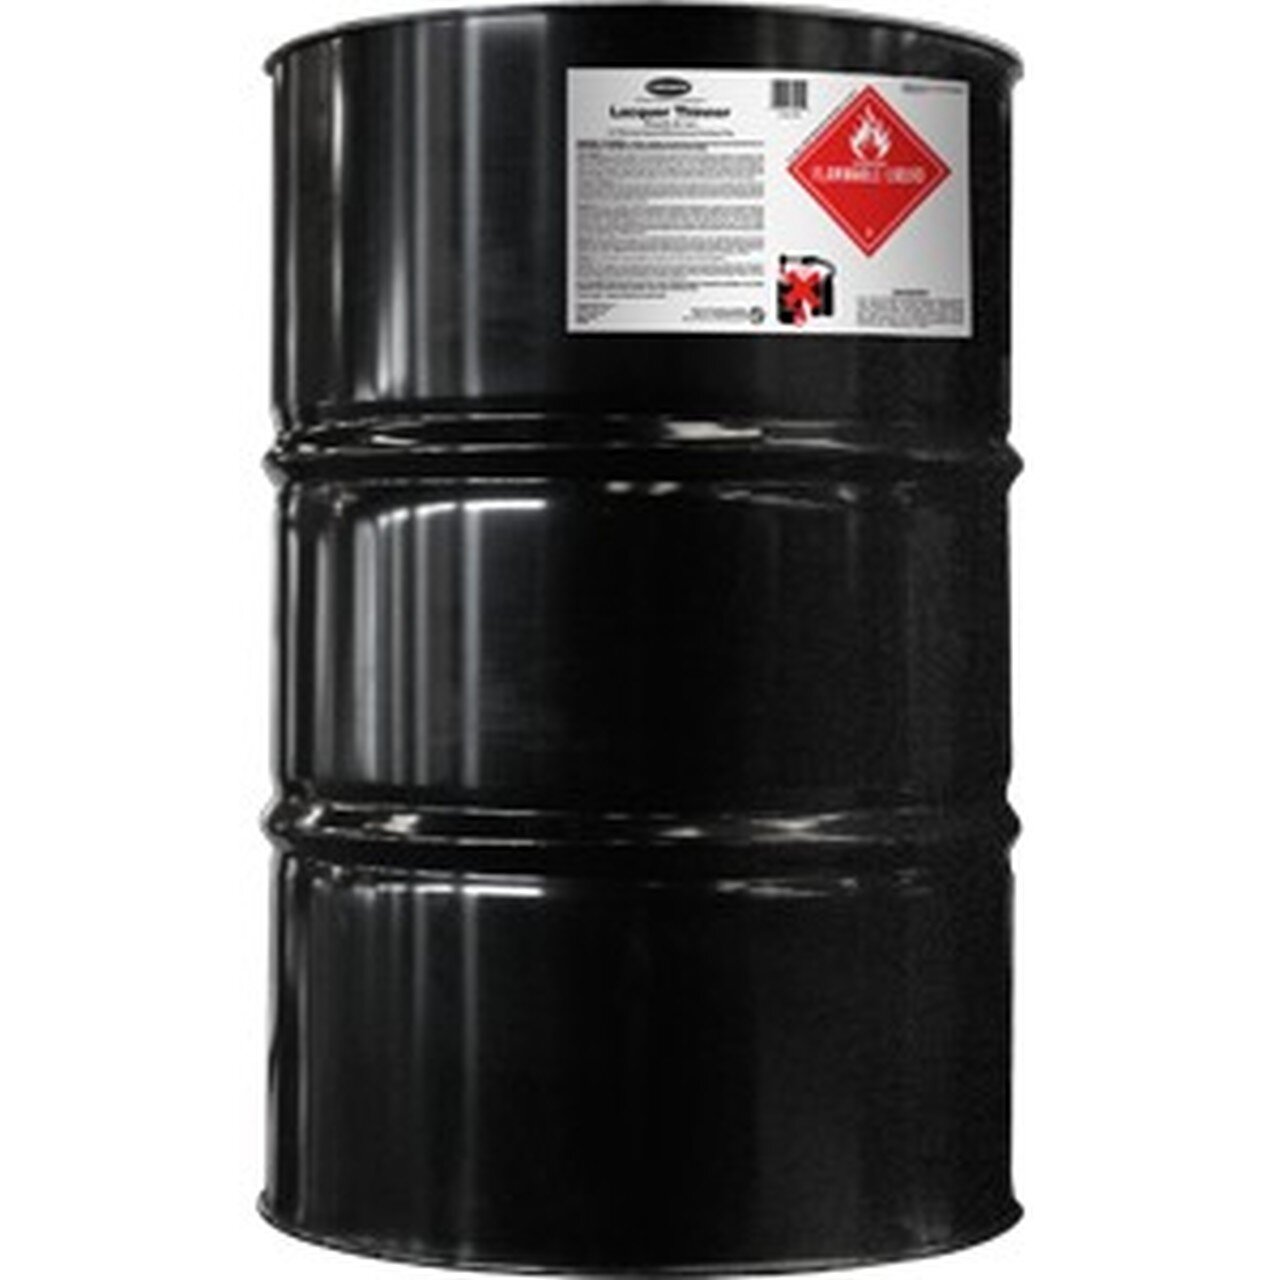 Crown Lacquer Thinner 55 gal - TradeOX by GTS 888 LLC Texas